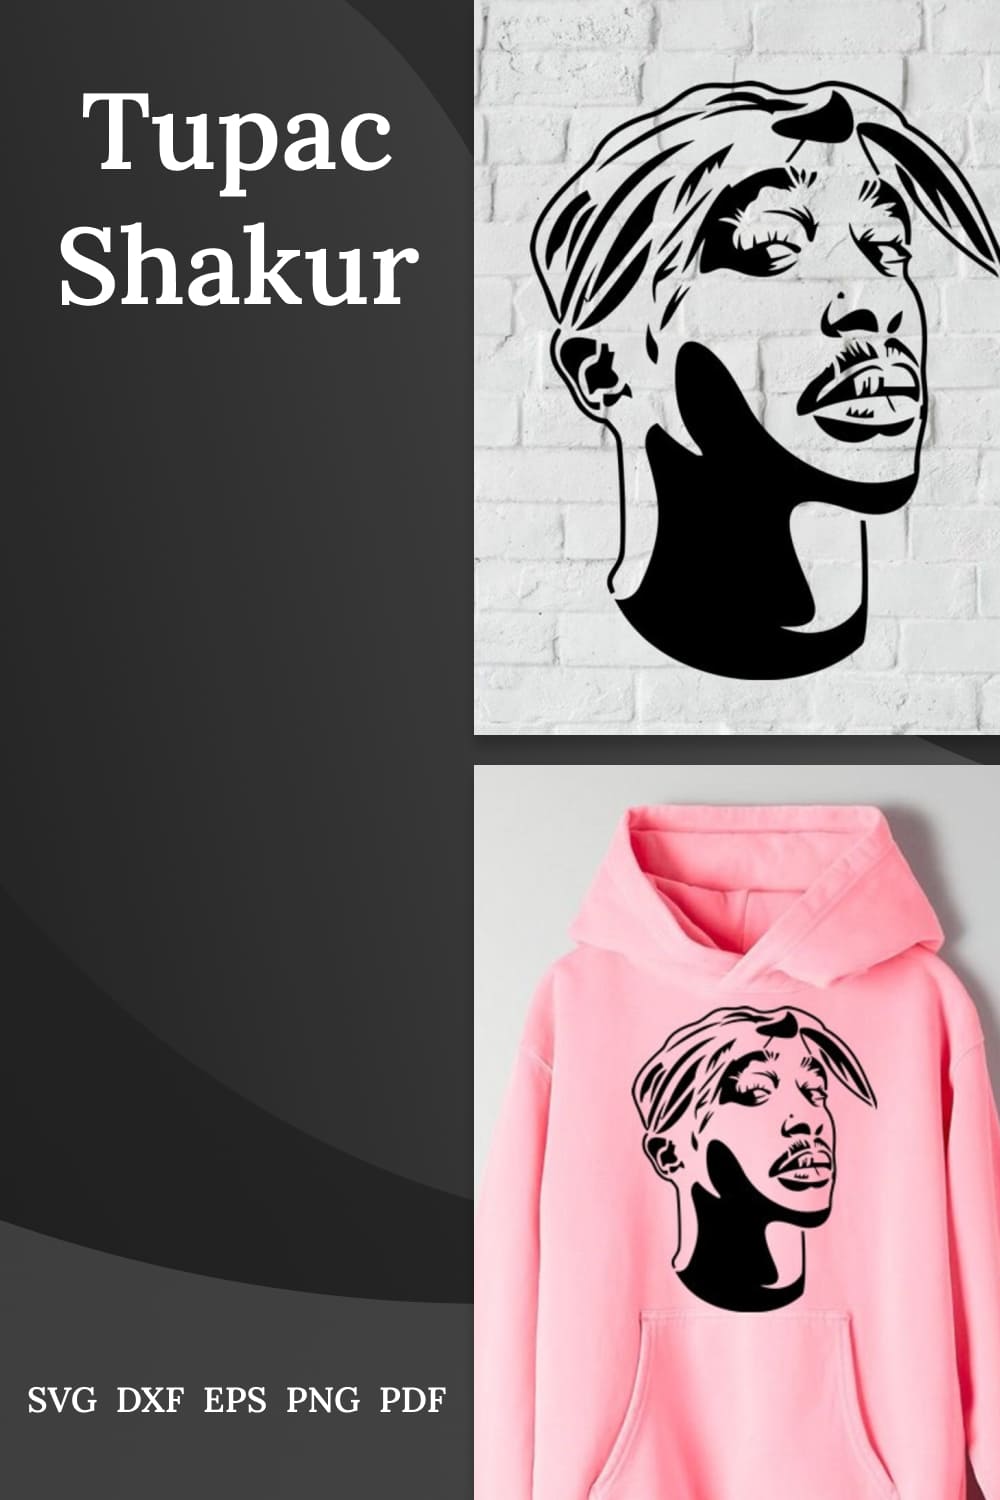 Tupac Shakur for different textures.